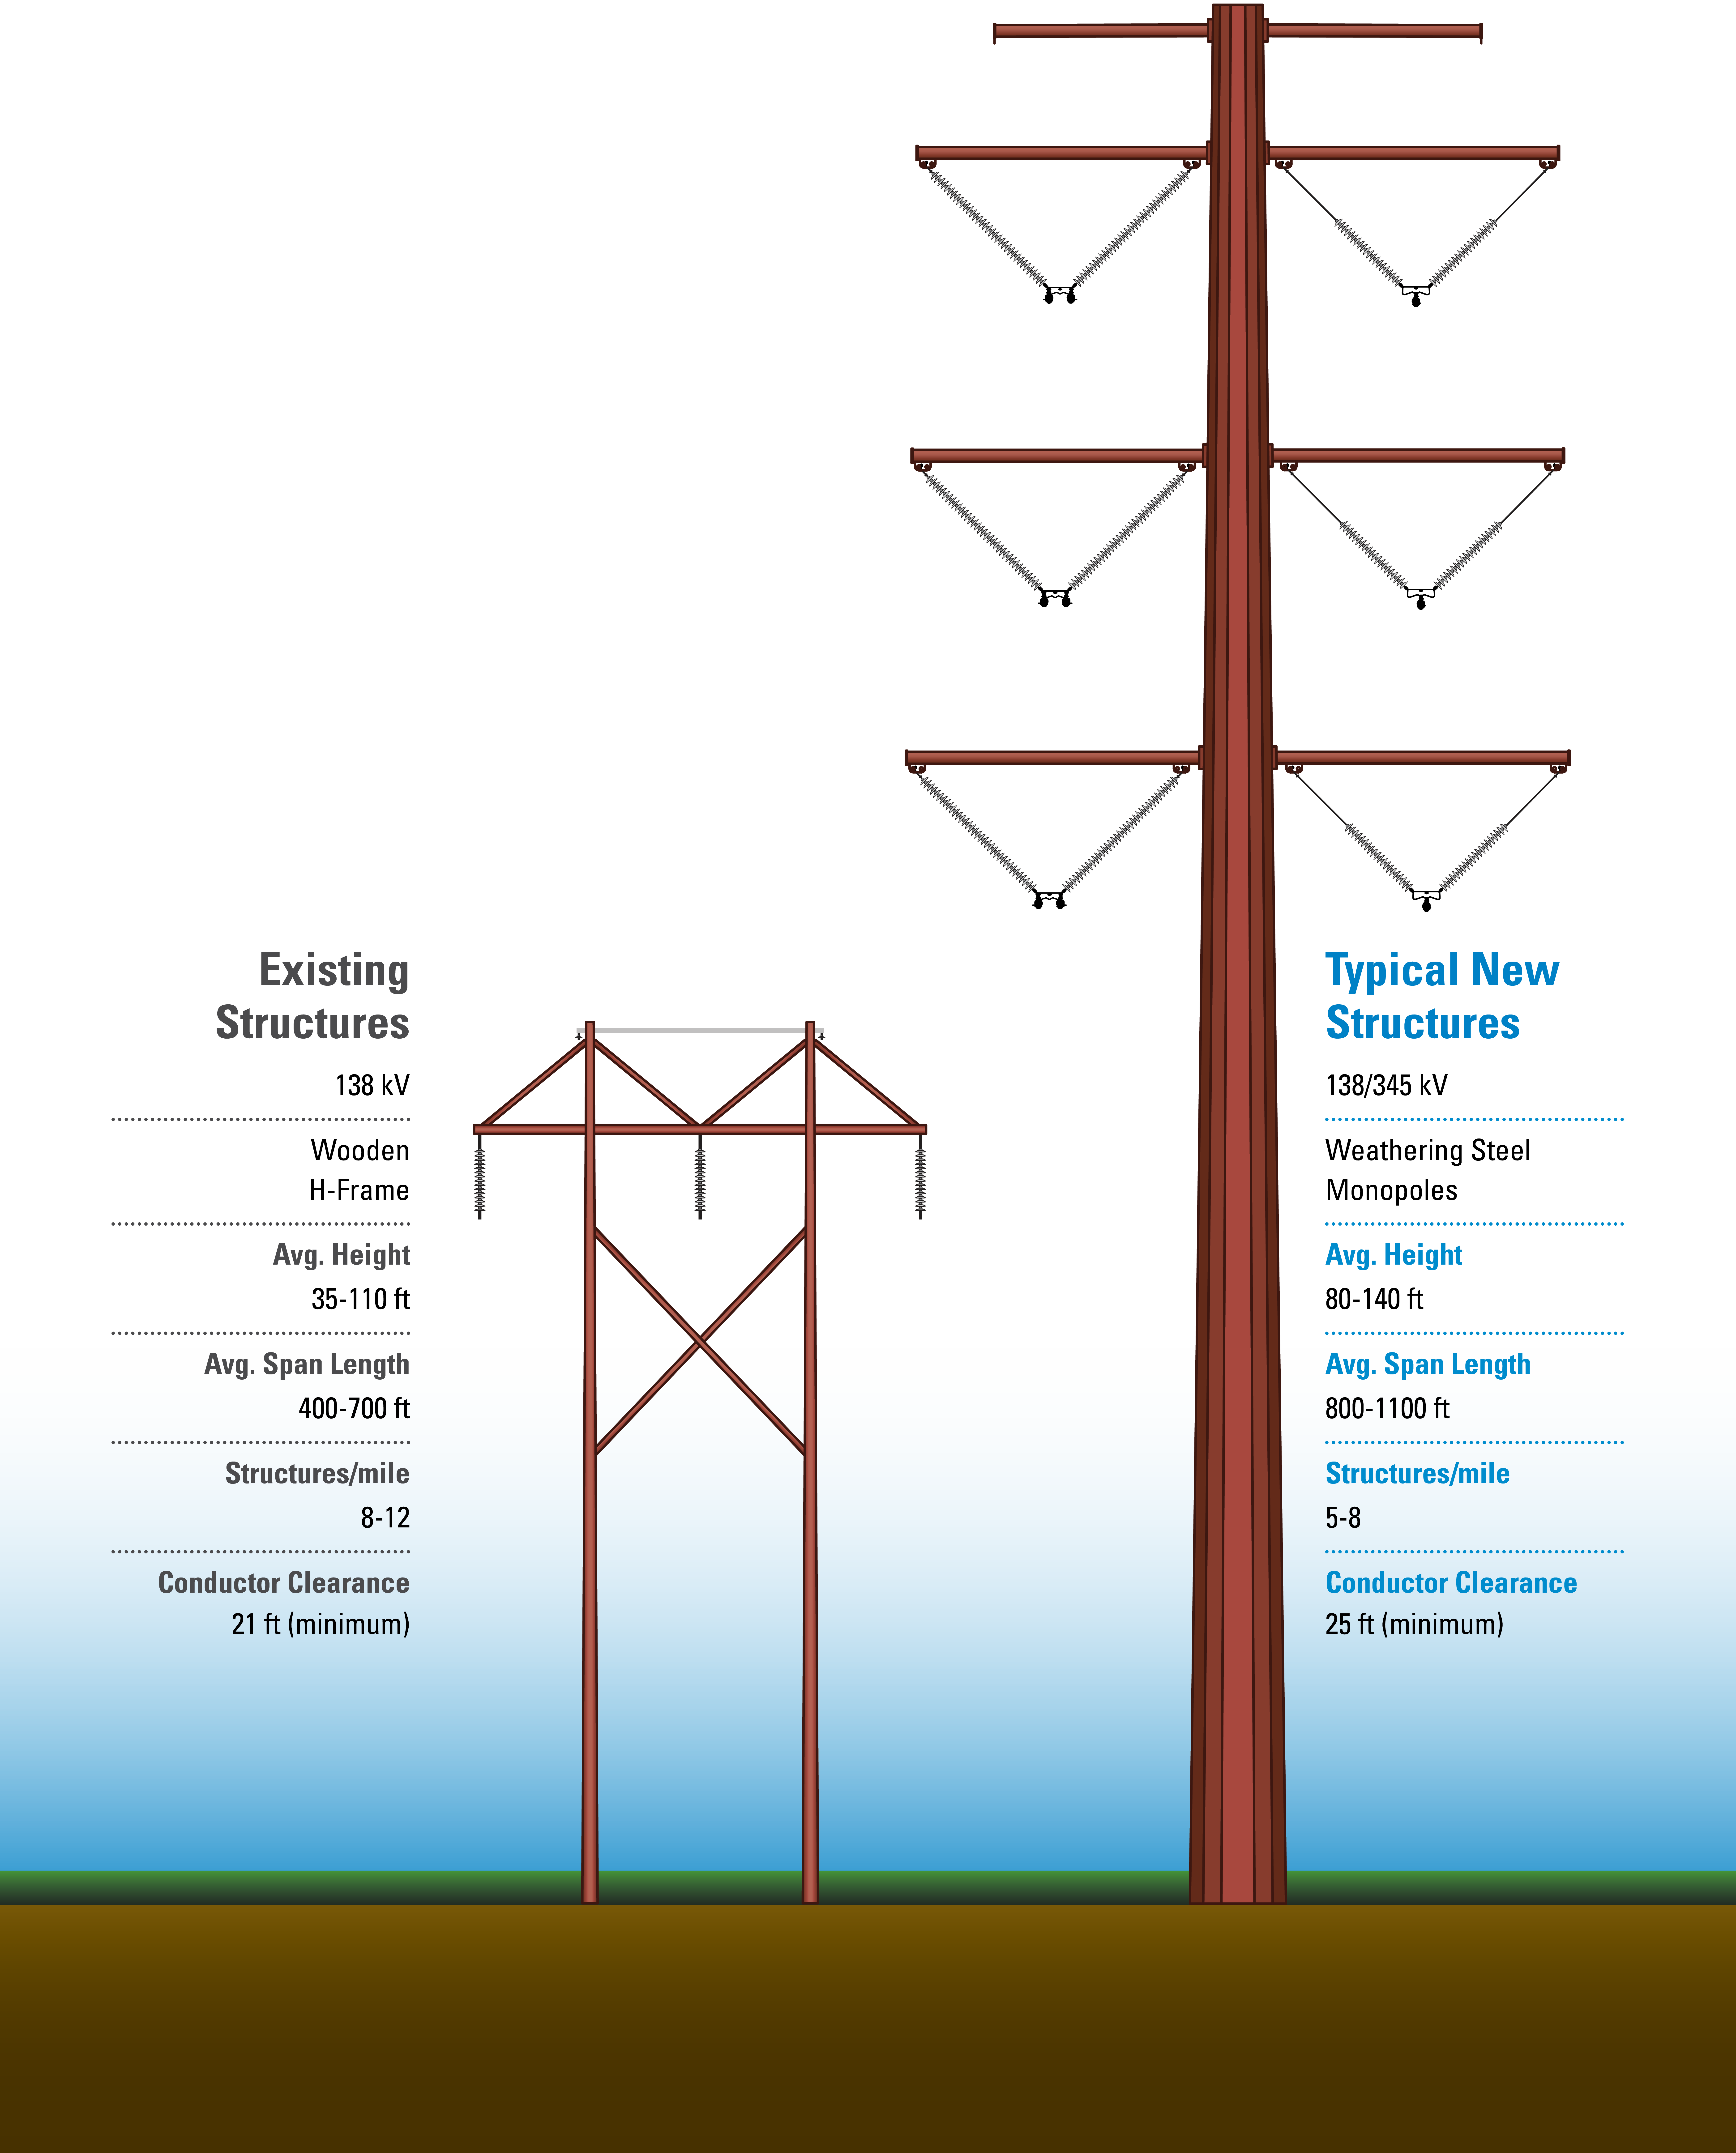 Two side by side structure graphics showing the existing structures and anticipated new structures for the county. Graphics are intended for information purposes only and are not to scale. New structure designs, including number of arms and type of foundation may vary depending on final route, soil conditions, circuit design, and presence of distribution.
                                                  Graphic 1 shows the existing 138 kV wooden H-frame, with an average height of 35-110ft and average span length between 400-700ft. Structures per mile averages between 8-12 miles with a conductor clearance of 21ft minimum. 
                                                  
                                                  Graphic 2 shows the anticipated new structure as a 138/345 kV weathering steel monopole with an average height of 80-140ft and average span length between 800-1100 ft. Structures per mile averages between 5-8 miles with a conductor clearance of 25ft minimum.